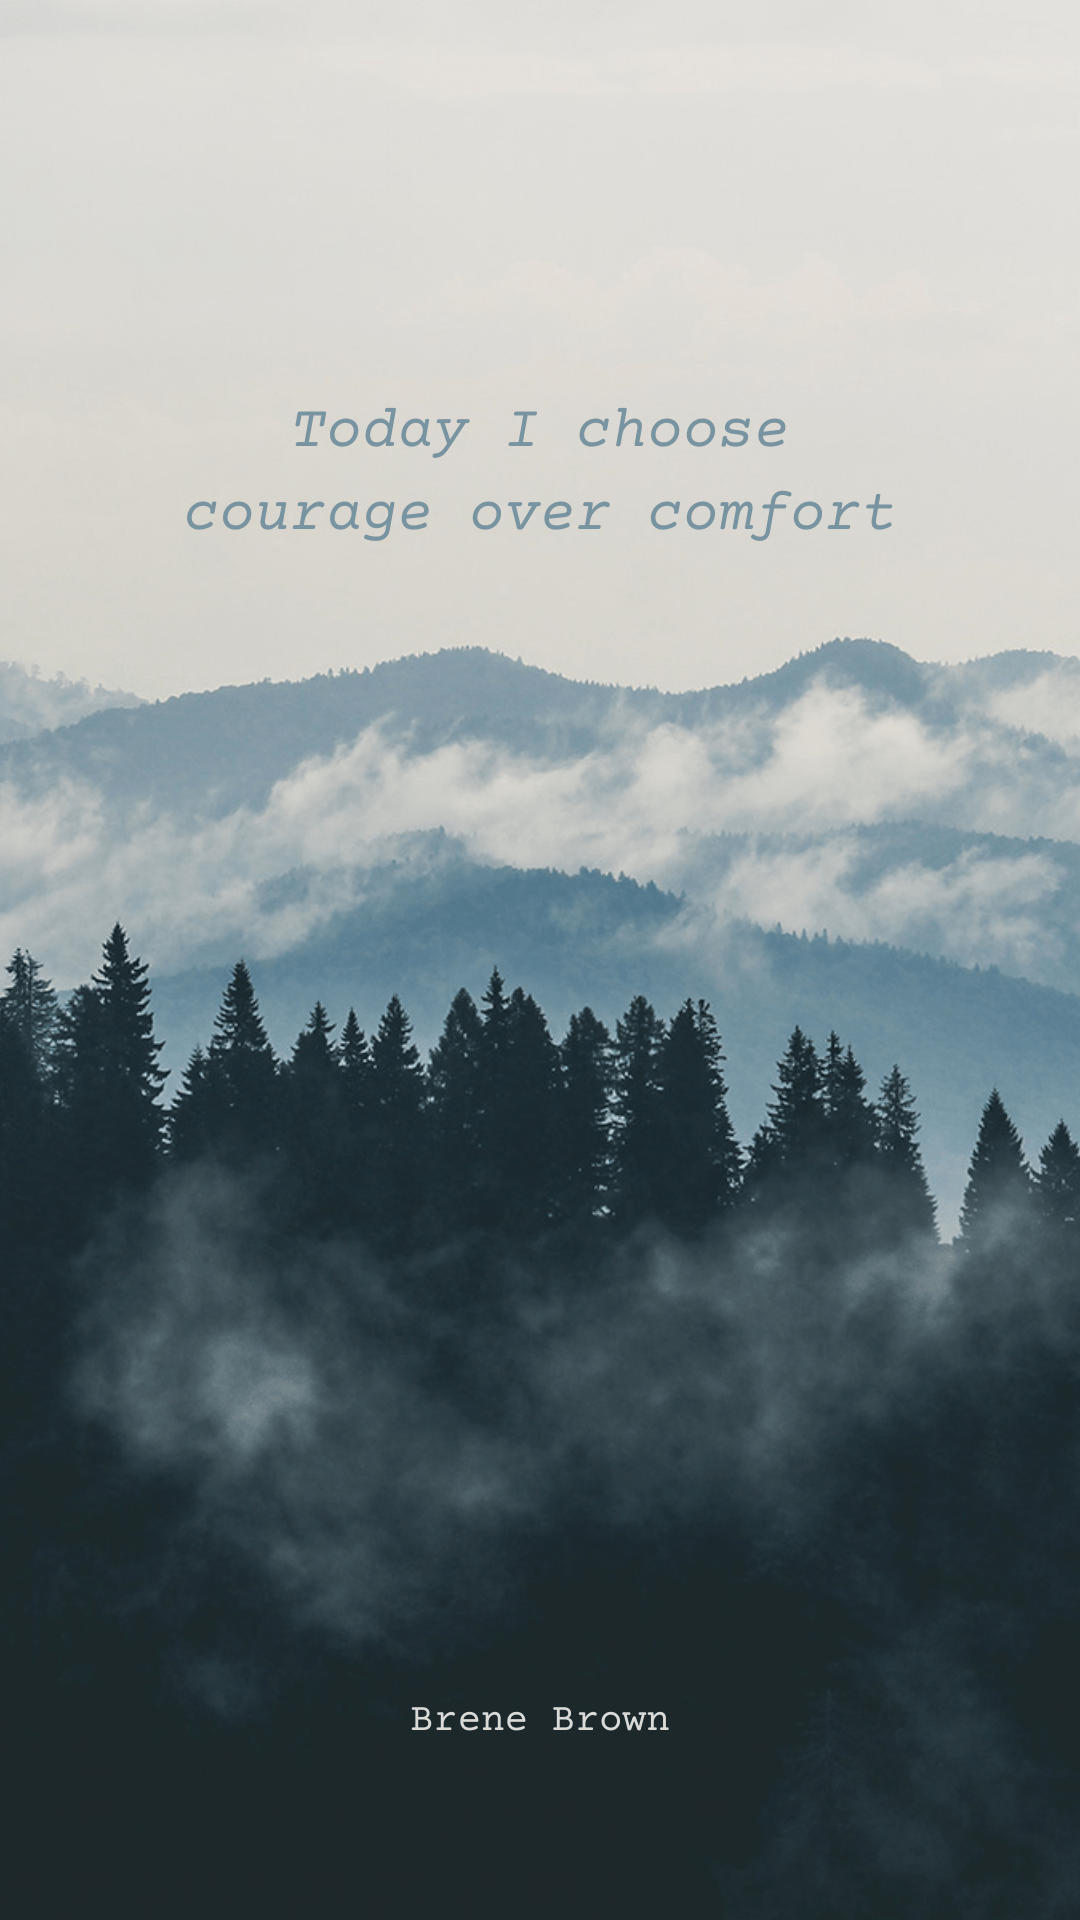 A quote that says today i choose courage over comfort - Calming